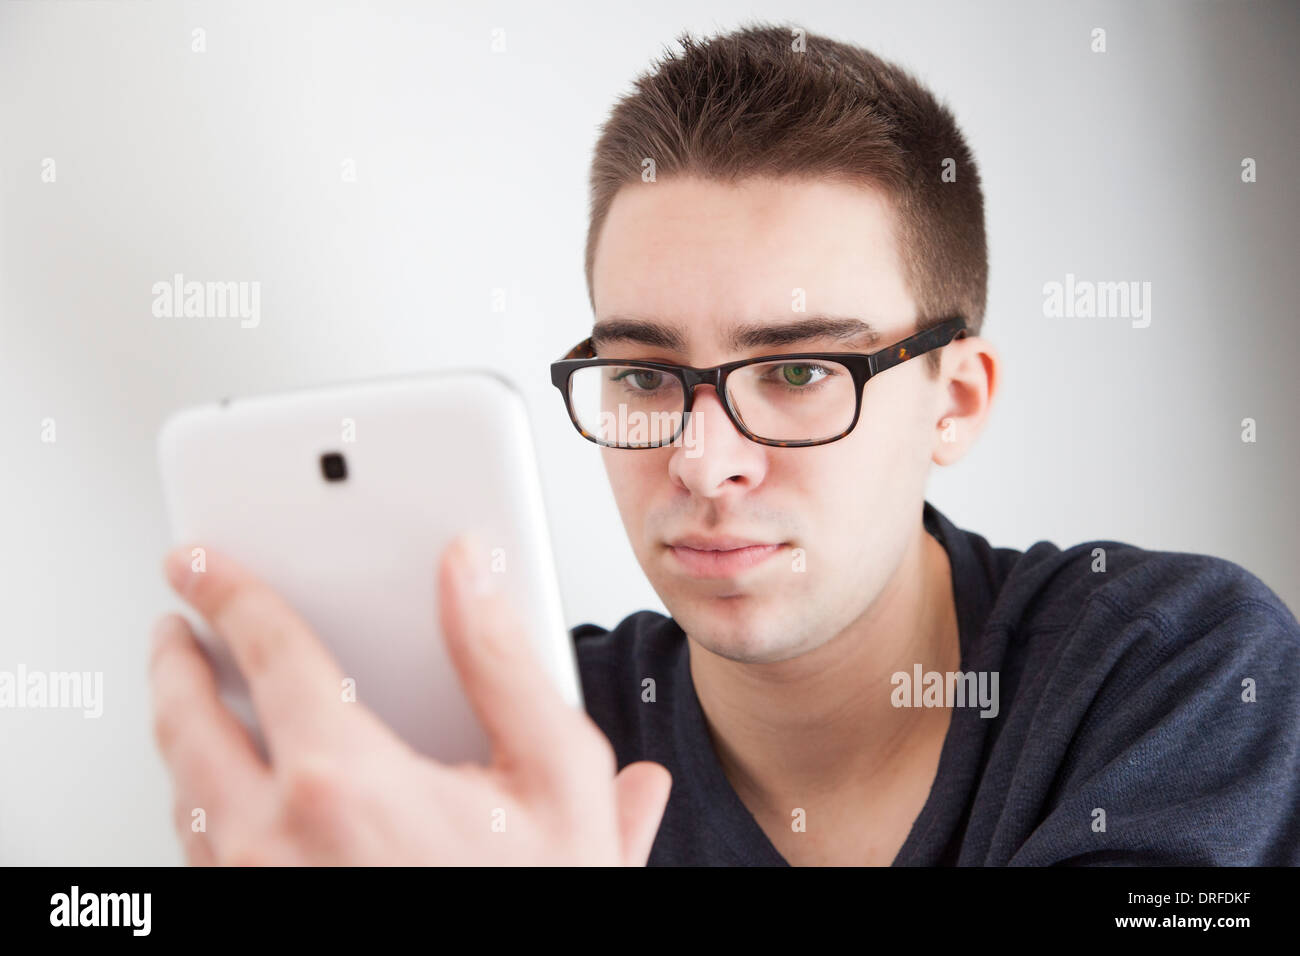 Good looking young man wearing glasses, holding a white digital tablet. Serious expression. Stock Photo